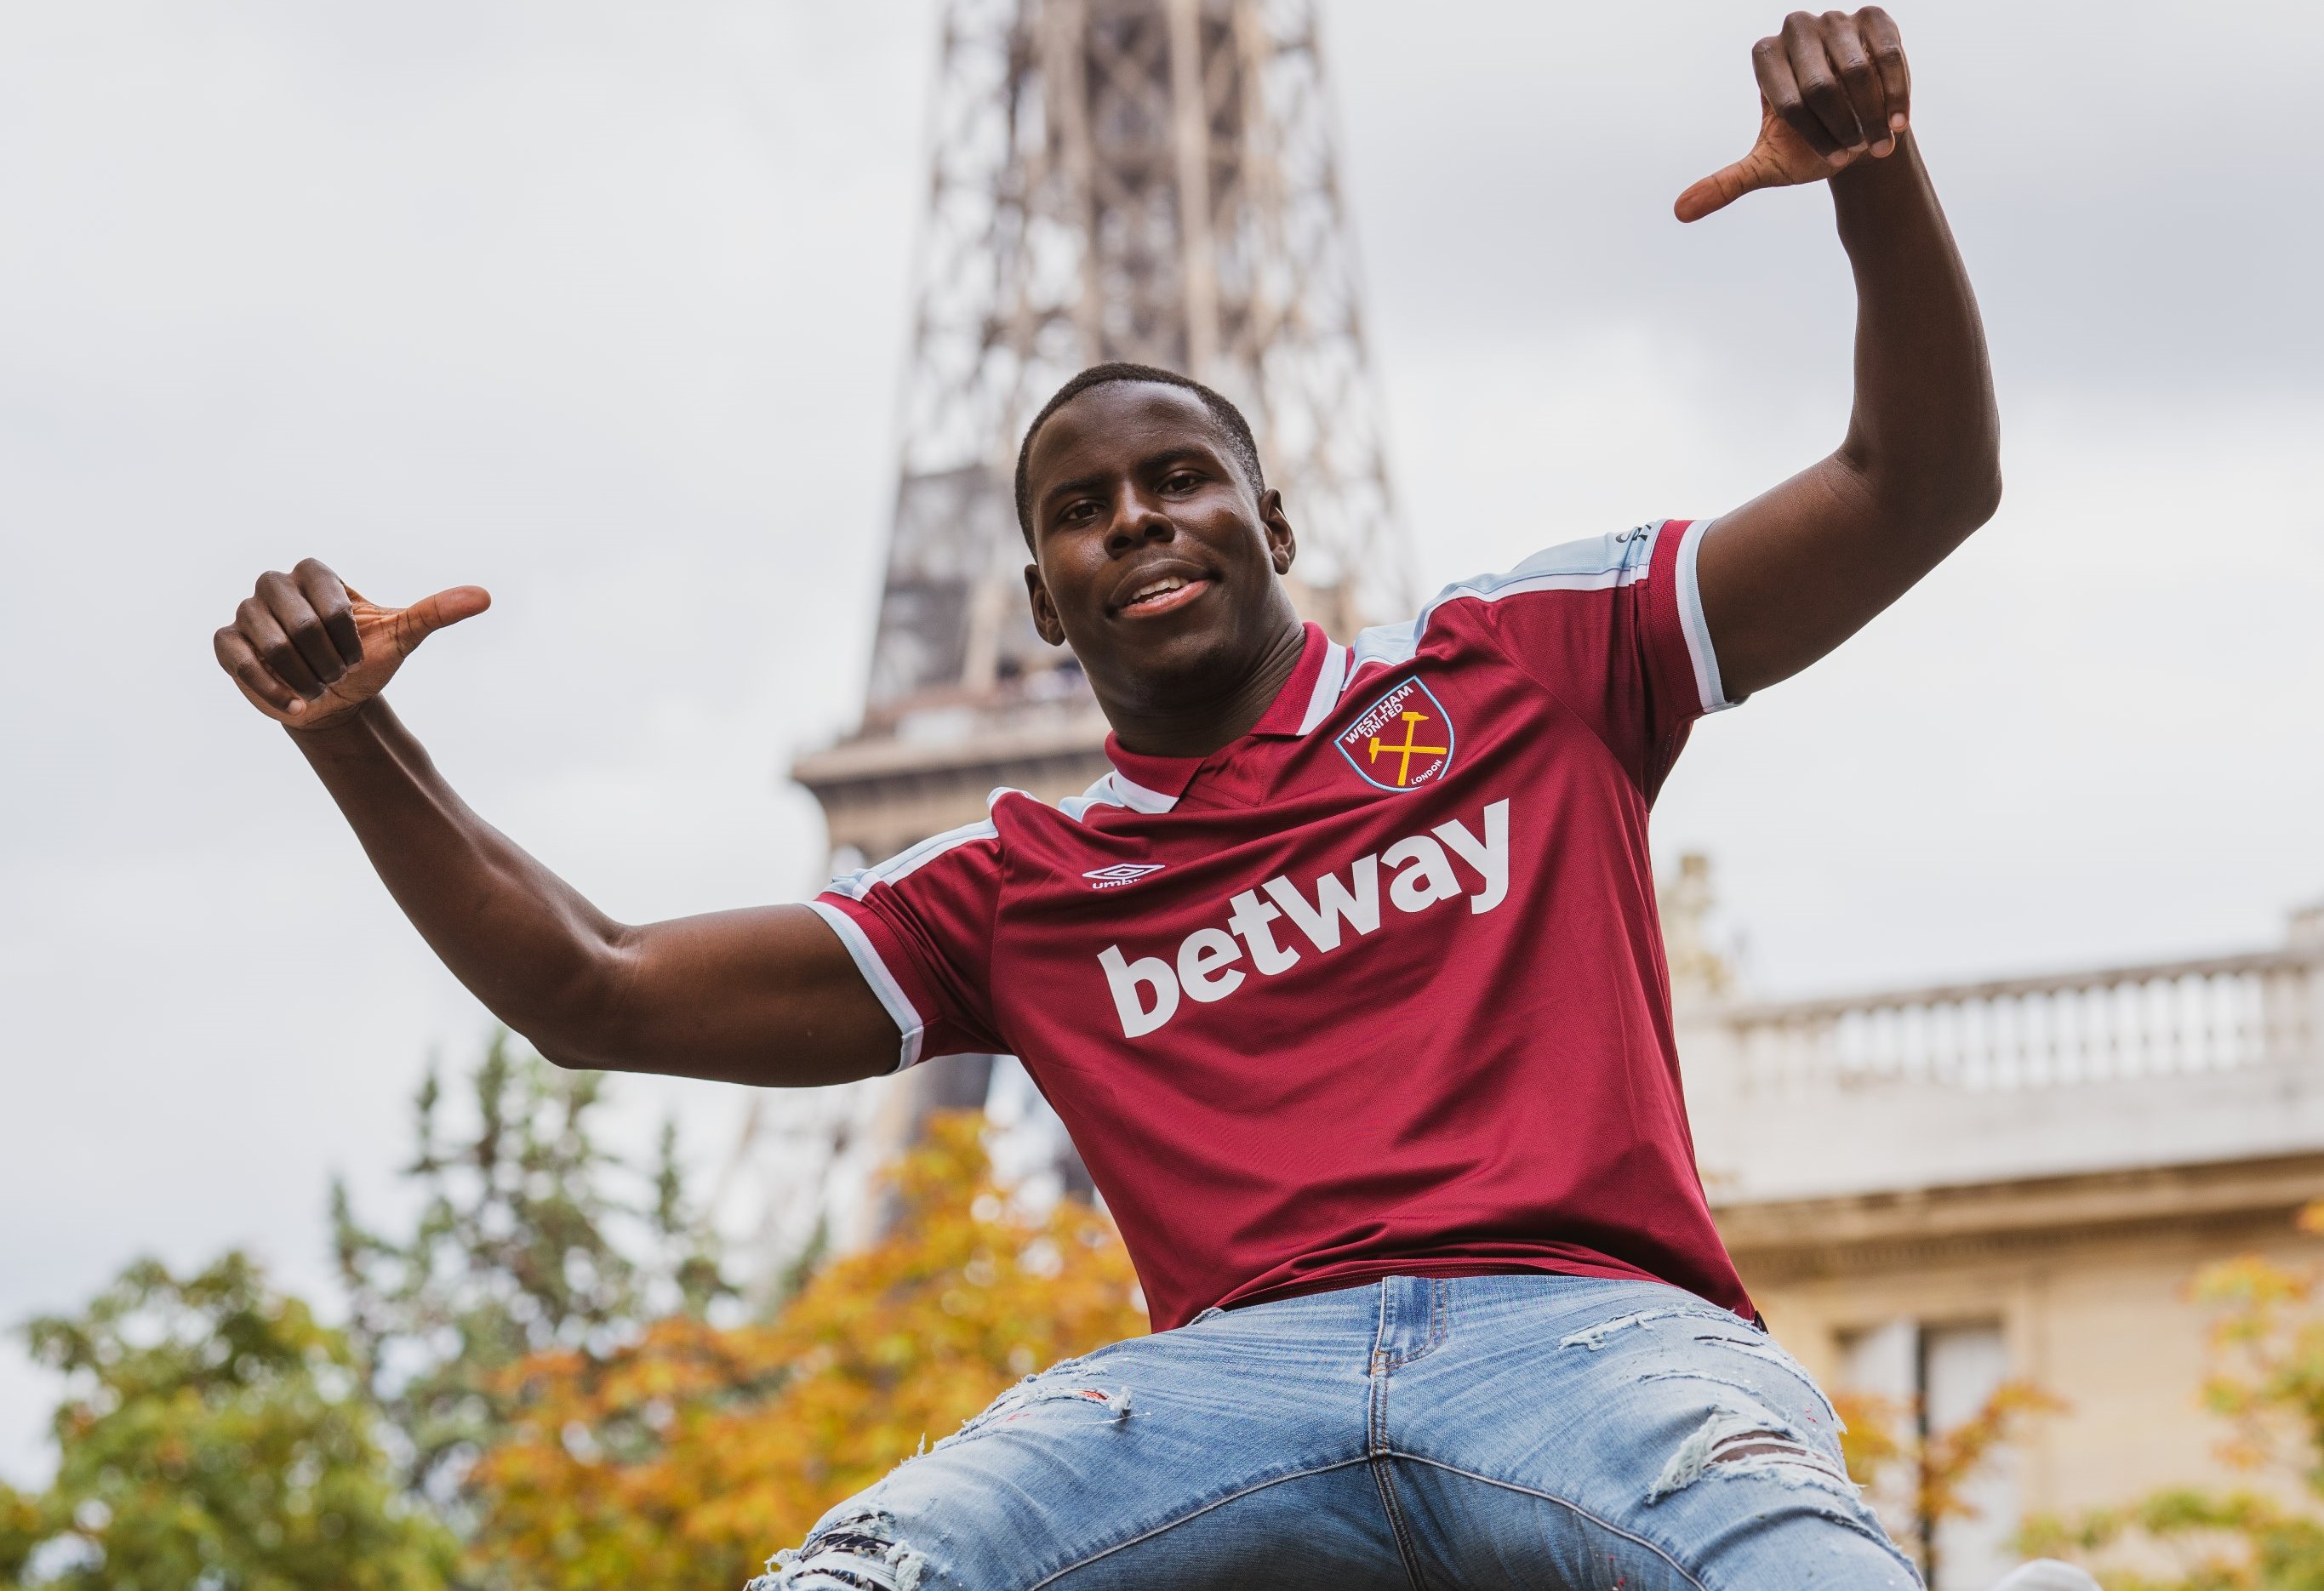 West Ham makes their third-biggest purchase in Zouma, yet the two more expensive signings flopped